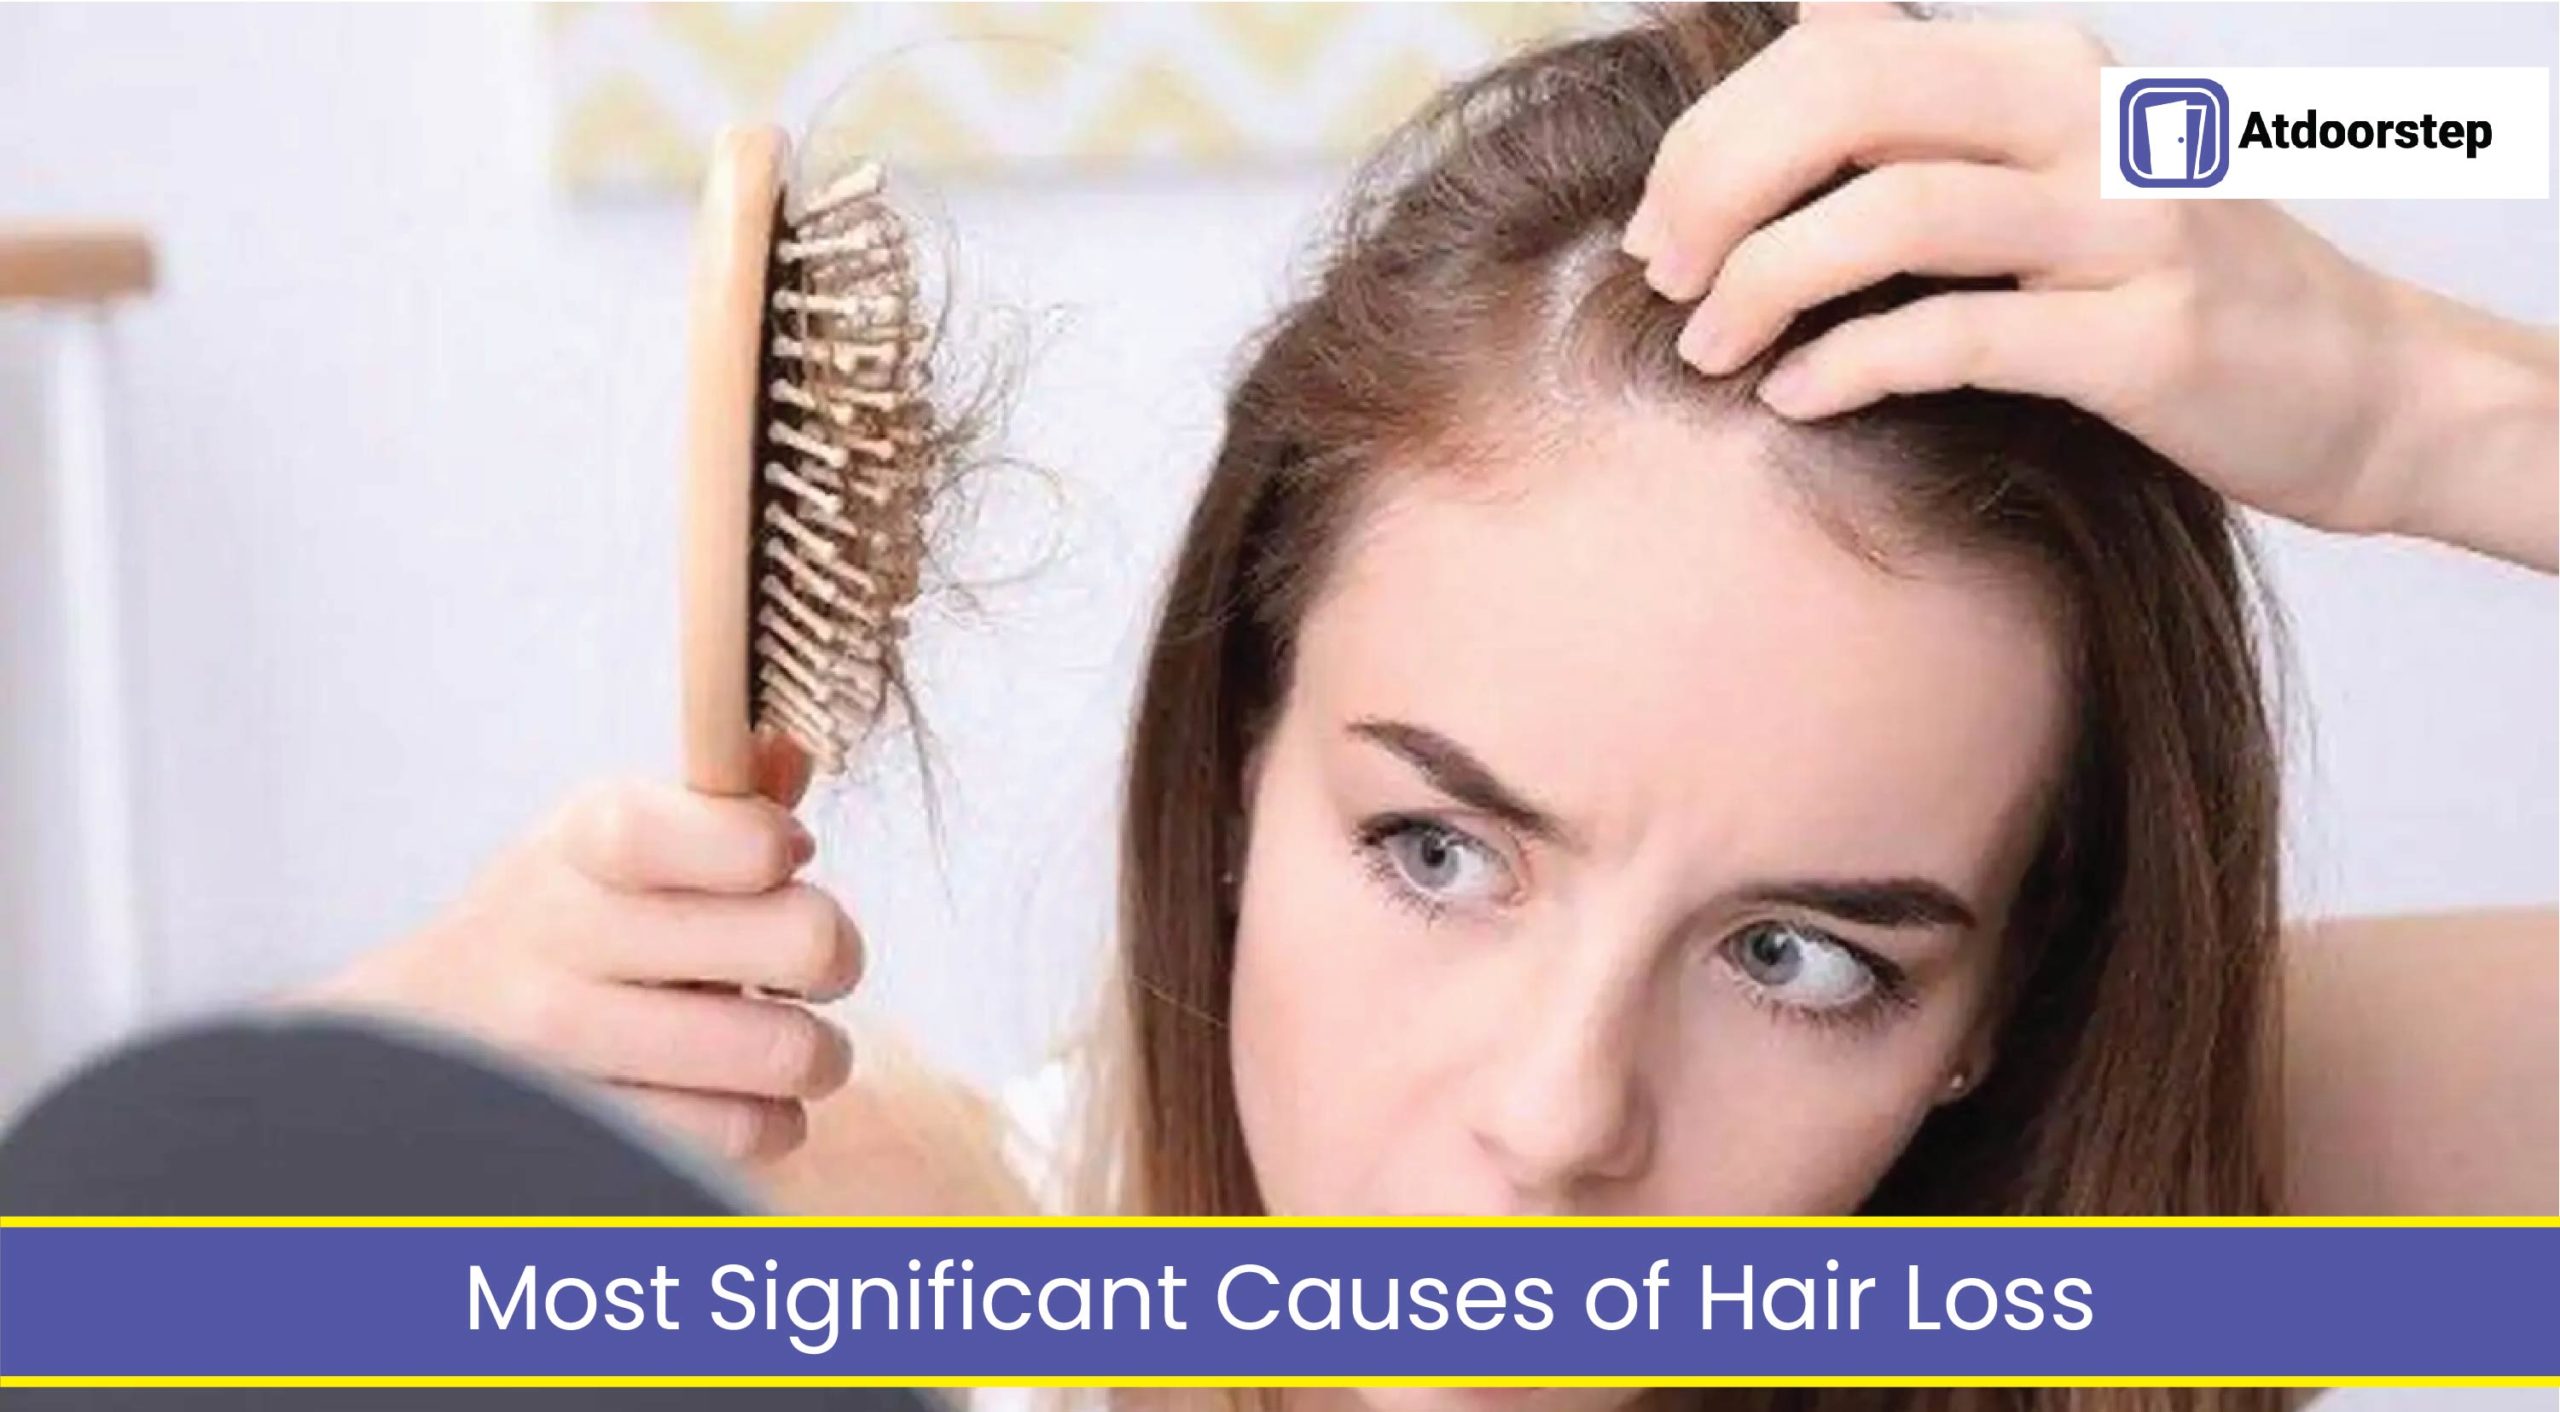 How to Stop hair Fall | Reasons-Remedies-Precautions